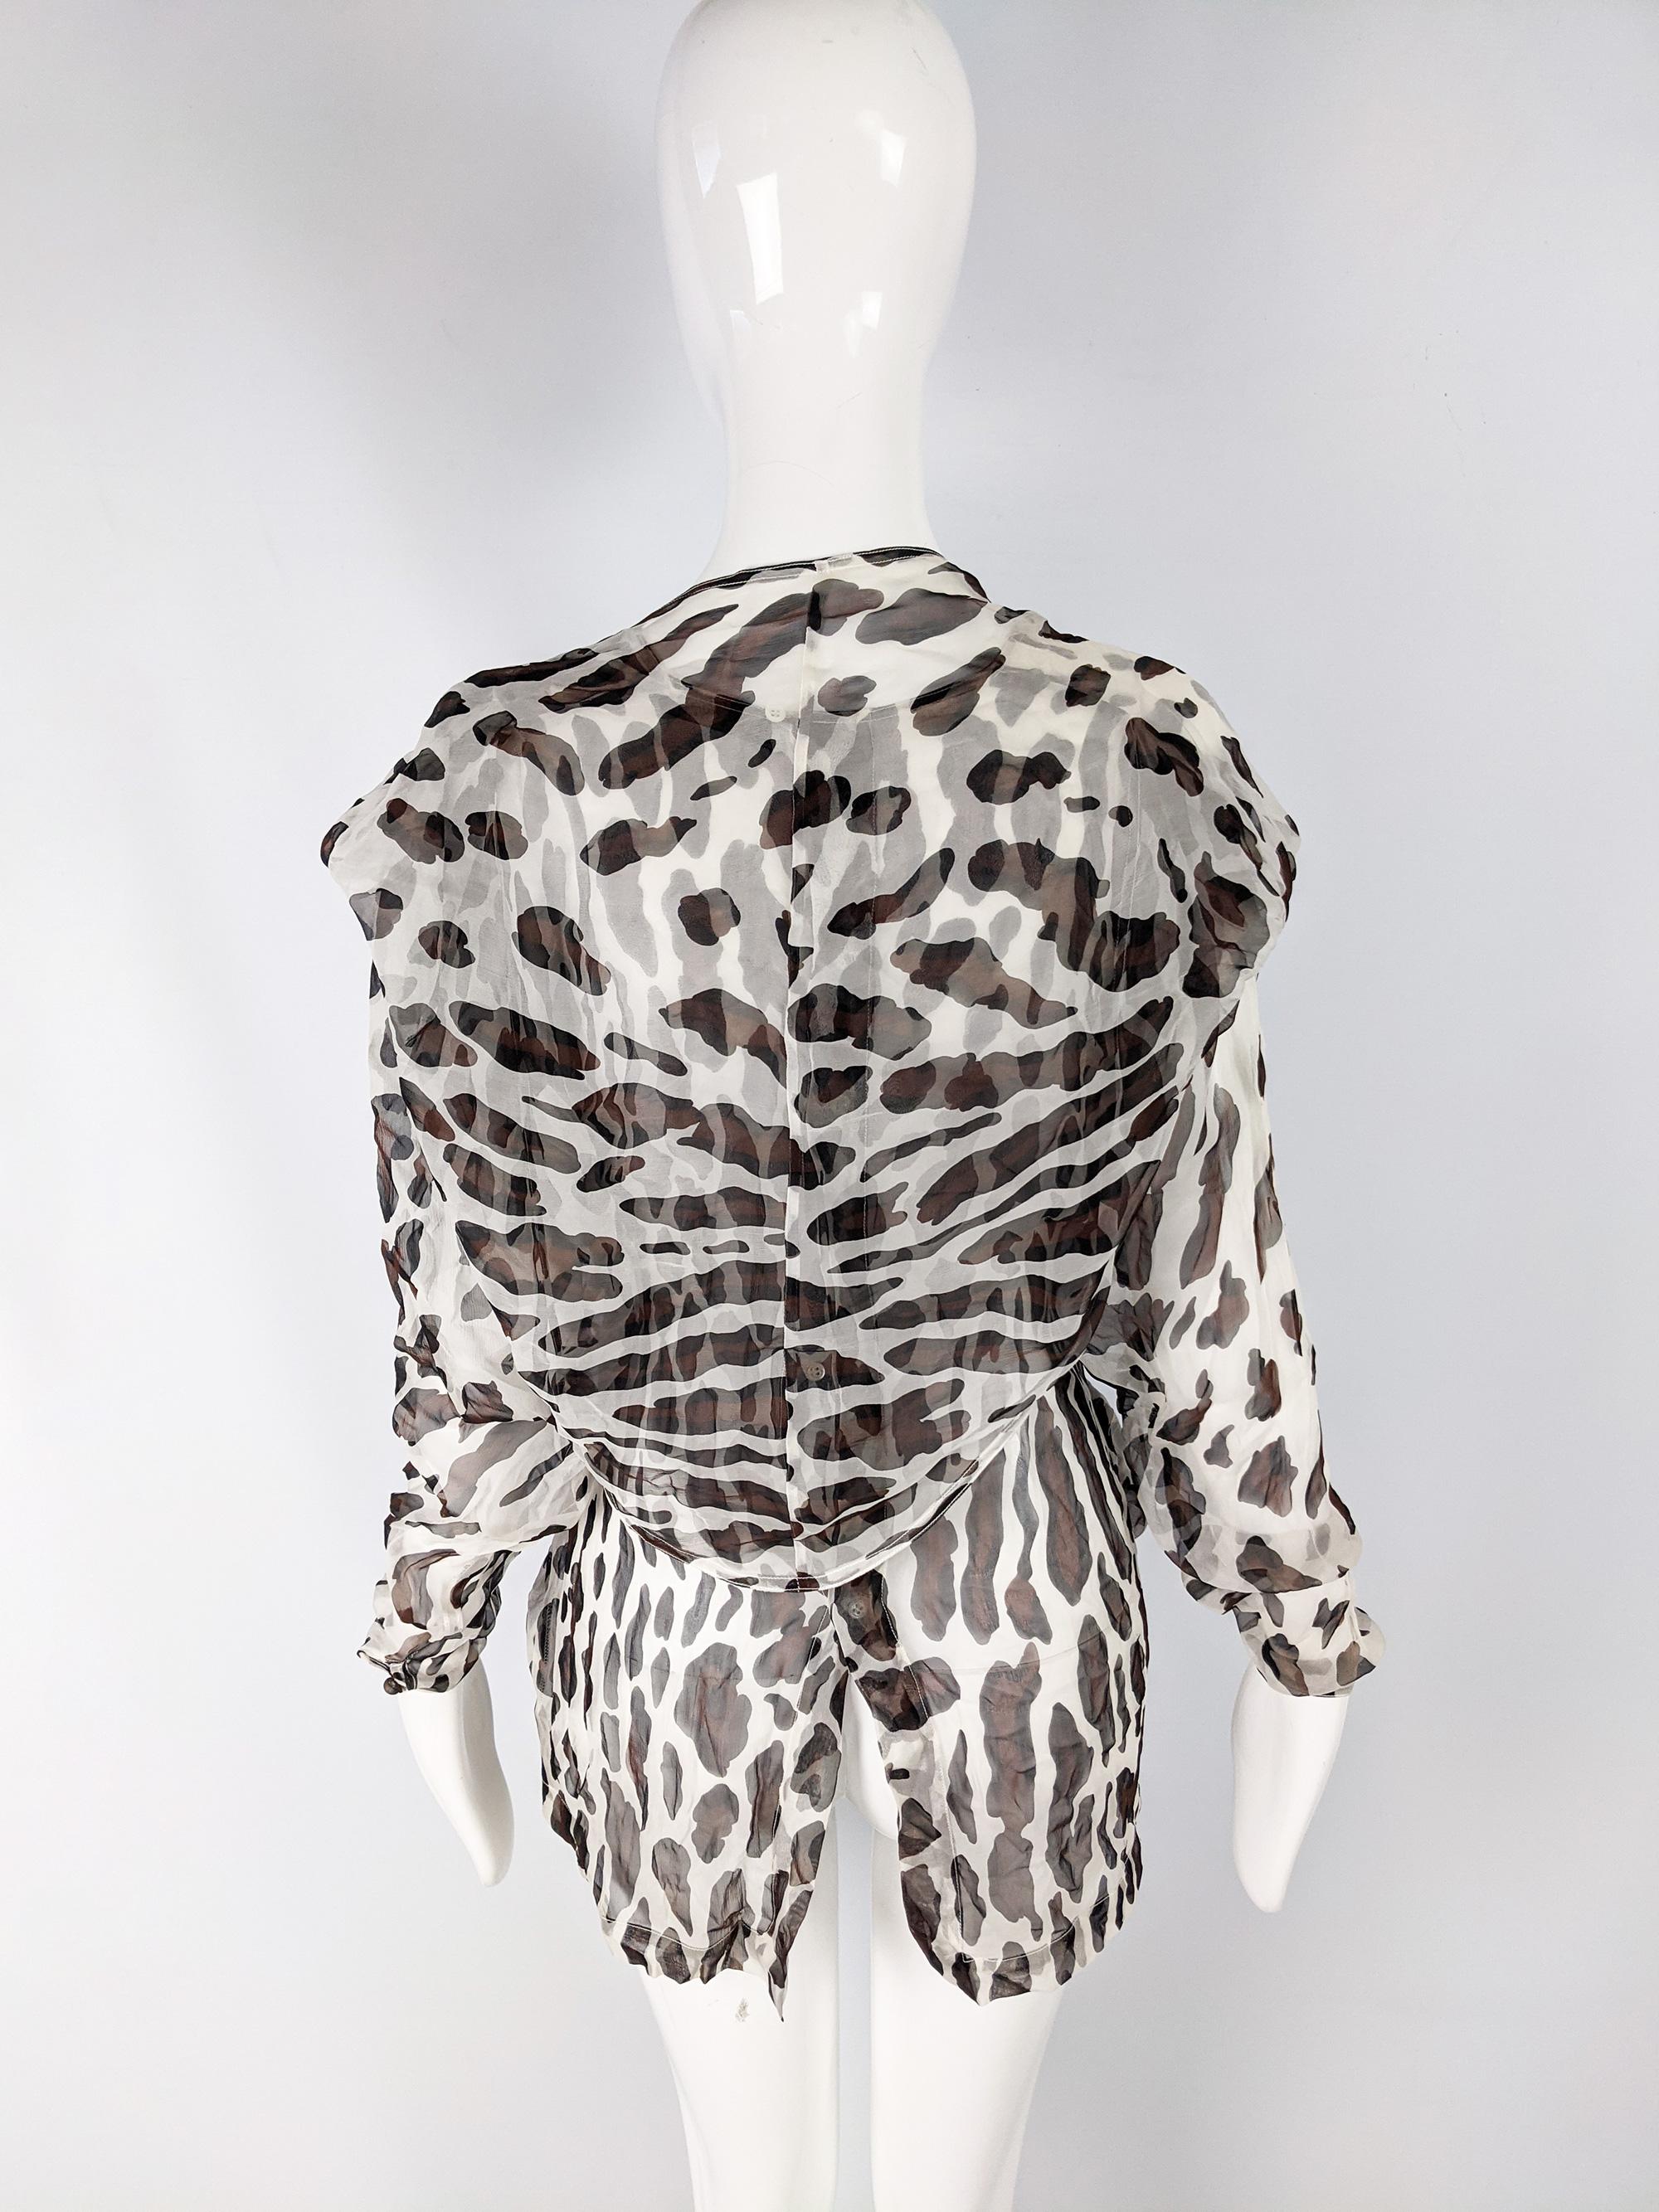 Liliane Romi Vintage Silk Chiffon Leopard Print Blouse In Excellent Condition For Sale In Doncaster, South Yorkshire